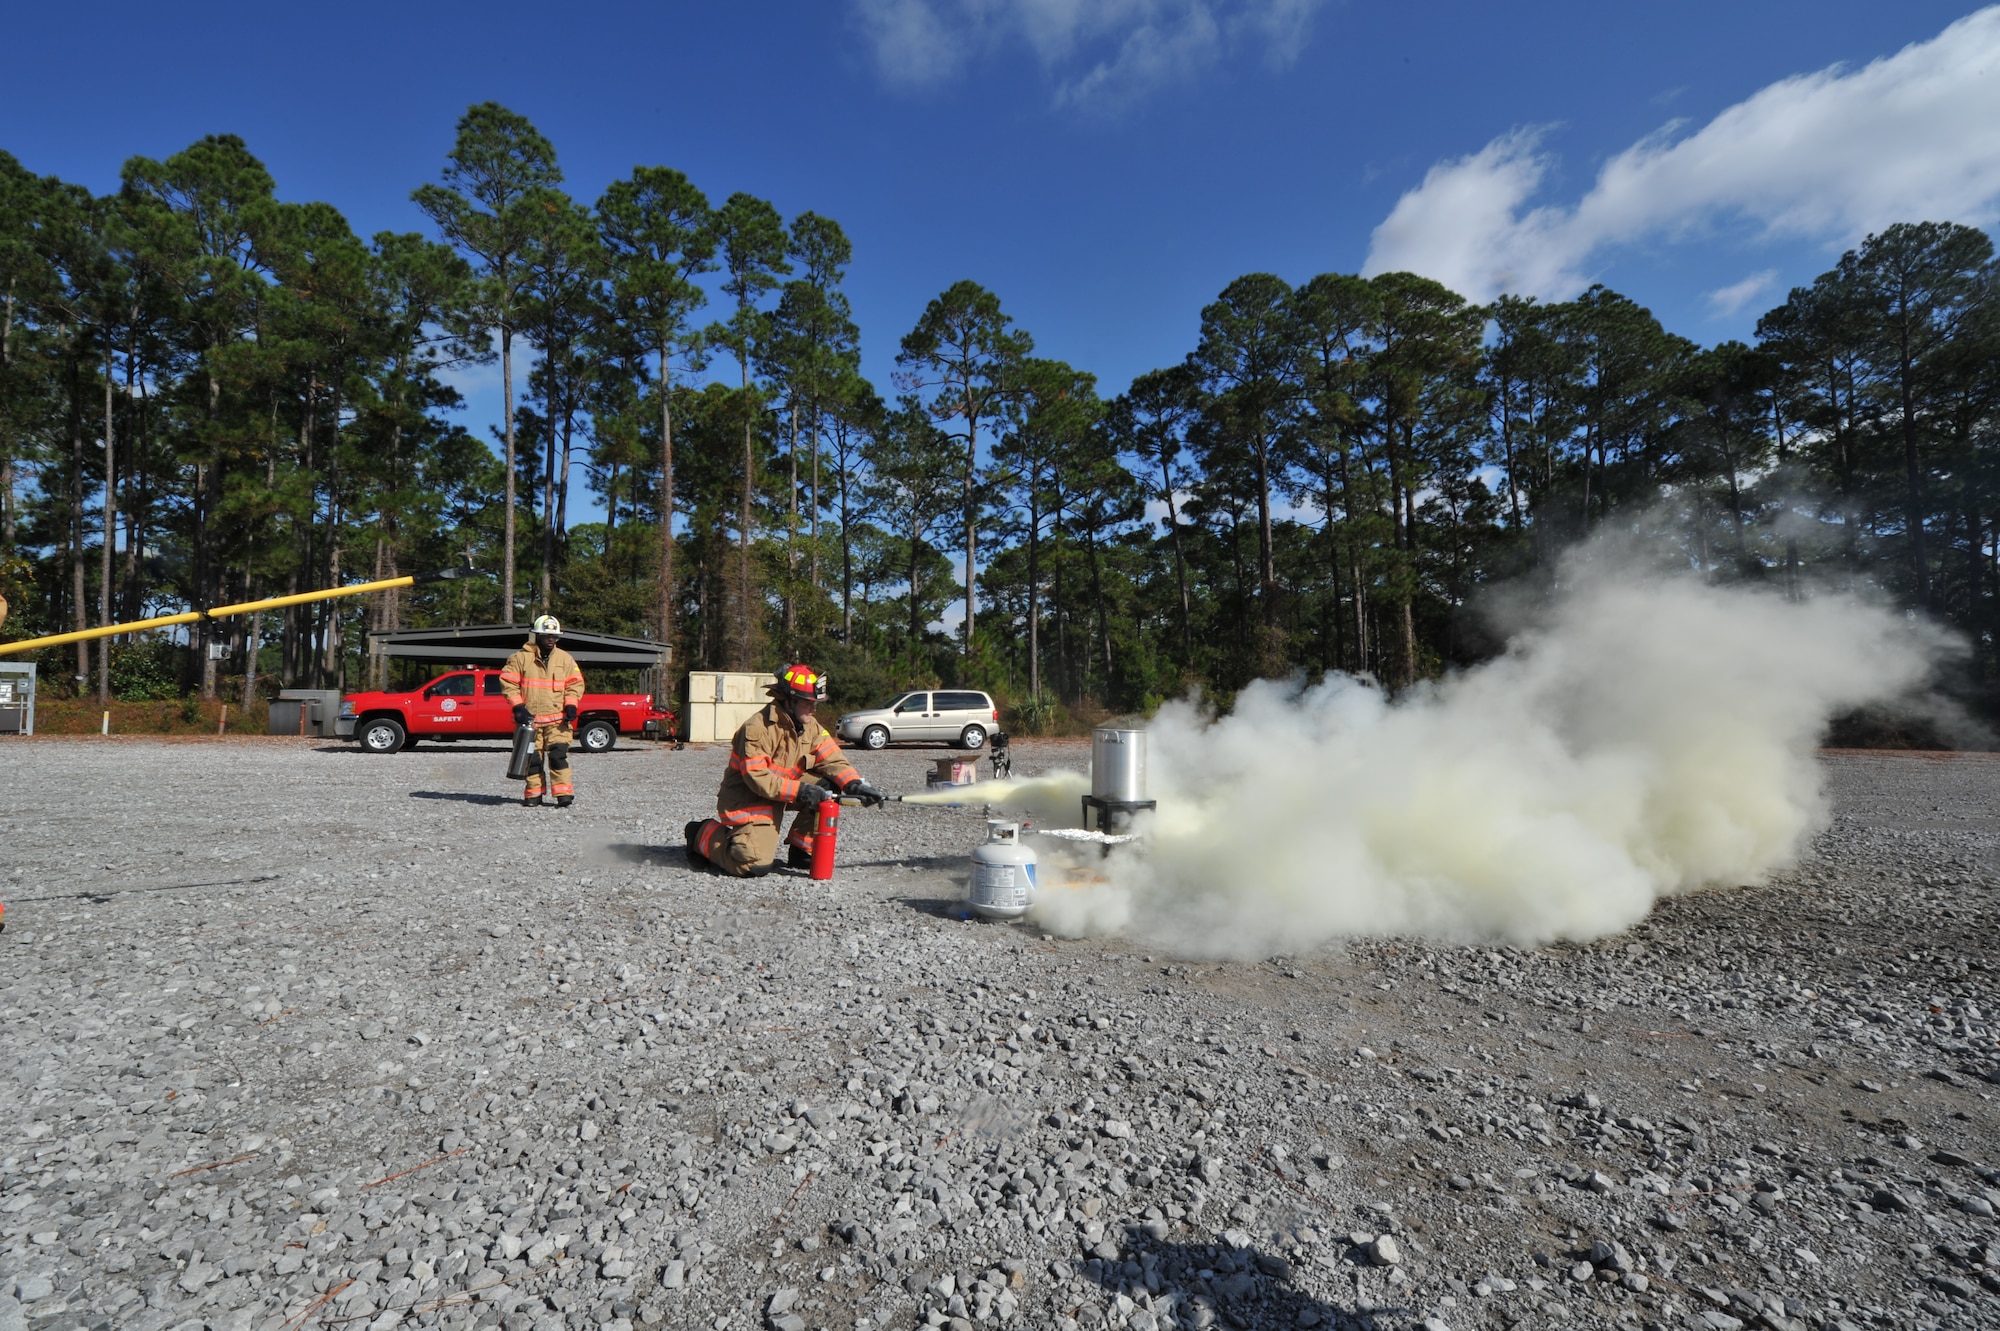 Staff Sgt. Glenn Rodgers, 1st Special Operations Civil Engineer Squadron fire inspector, sprays down a fire with a Class K fire extinguisher during a safety demonstration at the fire training area on Hurlburt Field, Fla., Nov. 27, 2013. Only Class ABC fire extinguishers, Class K fire extinguishers or baking powder should be used to put out grease fires. (U.S. Air Force photo/Staff Sgt. John Bainter)